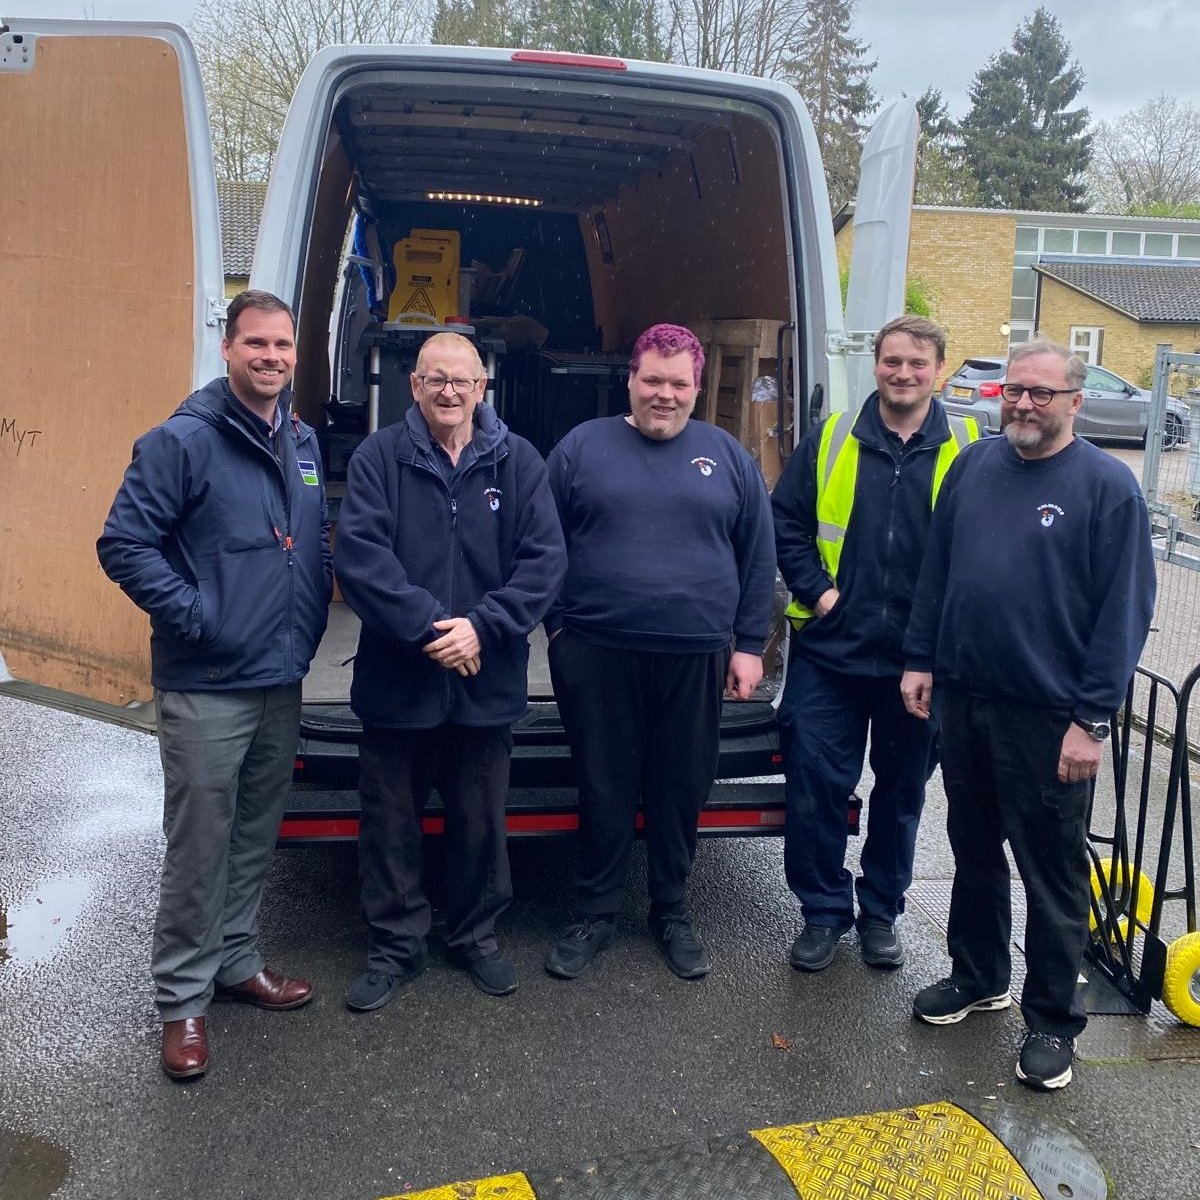 A MASSIVE thank you to the team at @BunzlCleaning for donating a van load of essentials for our community, including clothing, cleaning supplies and toiletries. Thank you so much for your continued support which is hugely appreciated 🙏💚